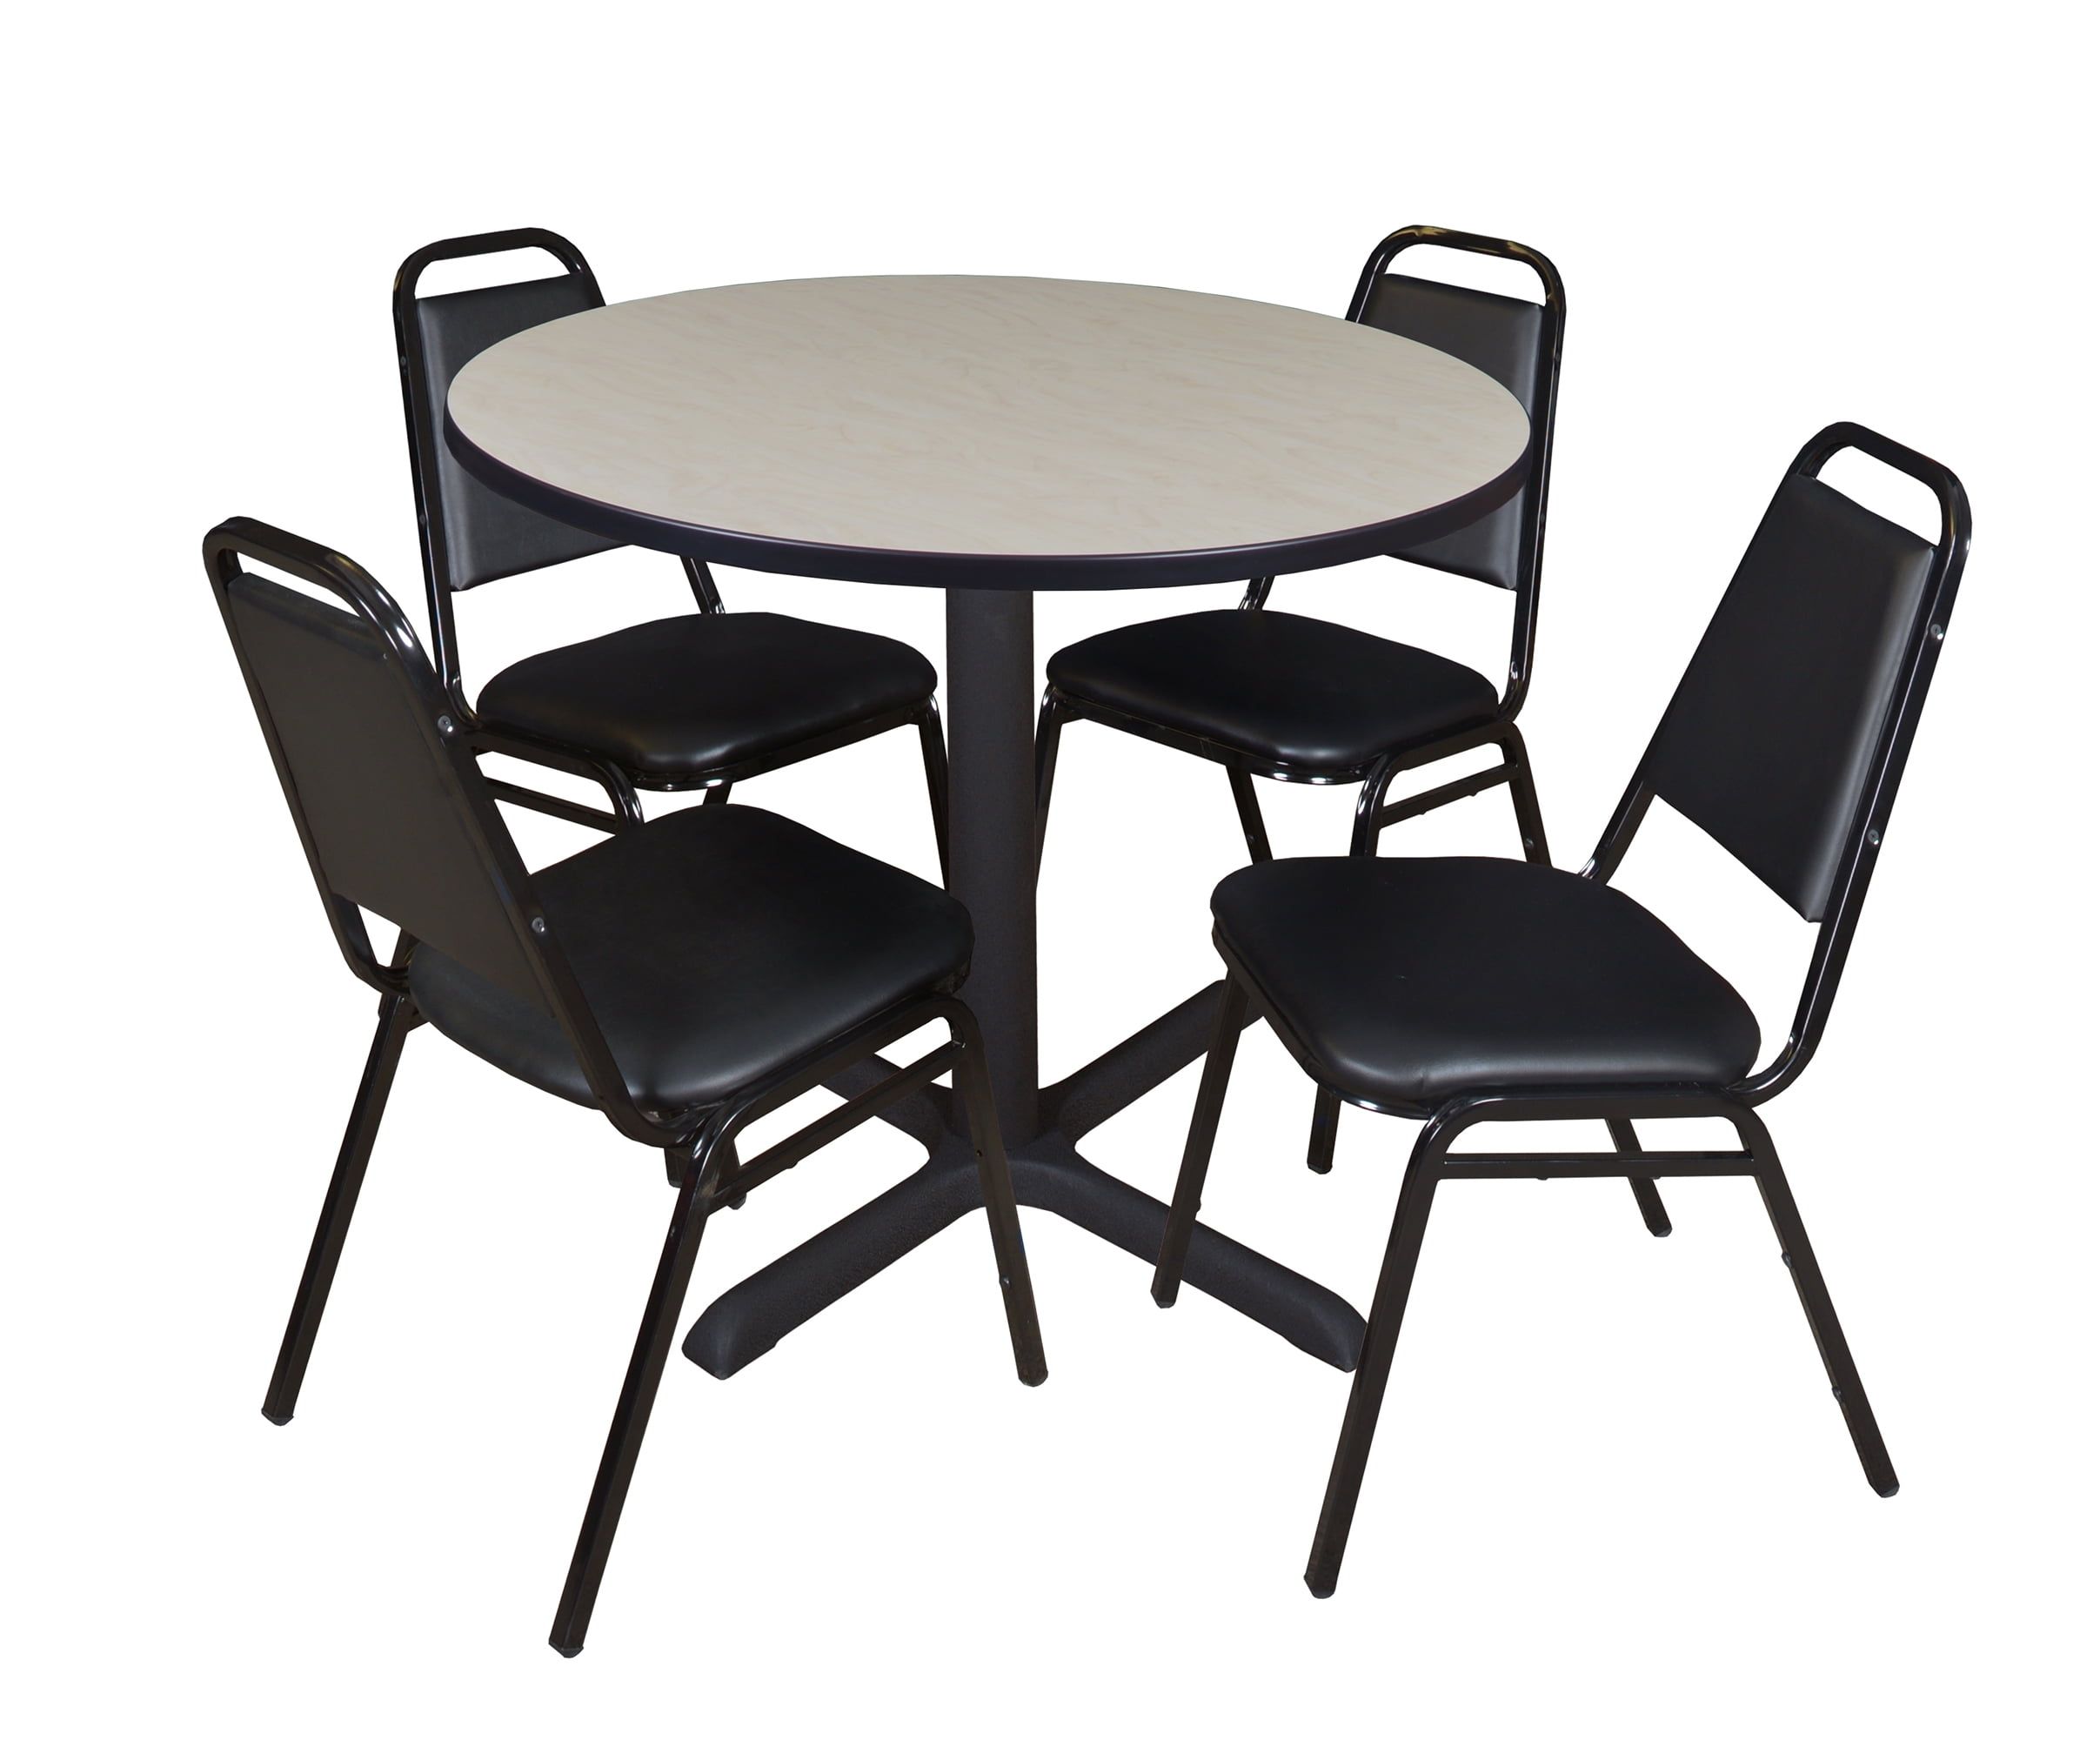 Regency Cain Round Breakroom Table With 4 Stackable Restaurant Chairs Throughout Regency Cain Steel Coffee Tables (Gallery 20 of 21)